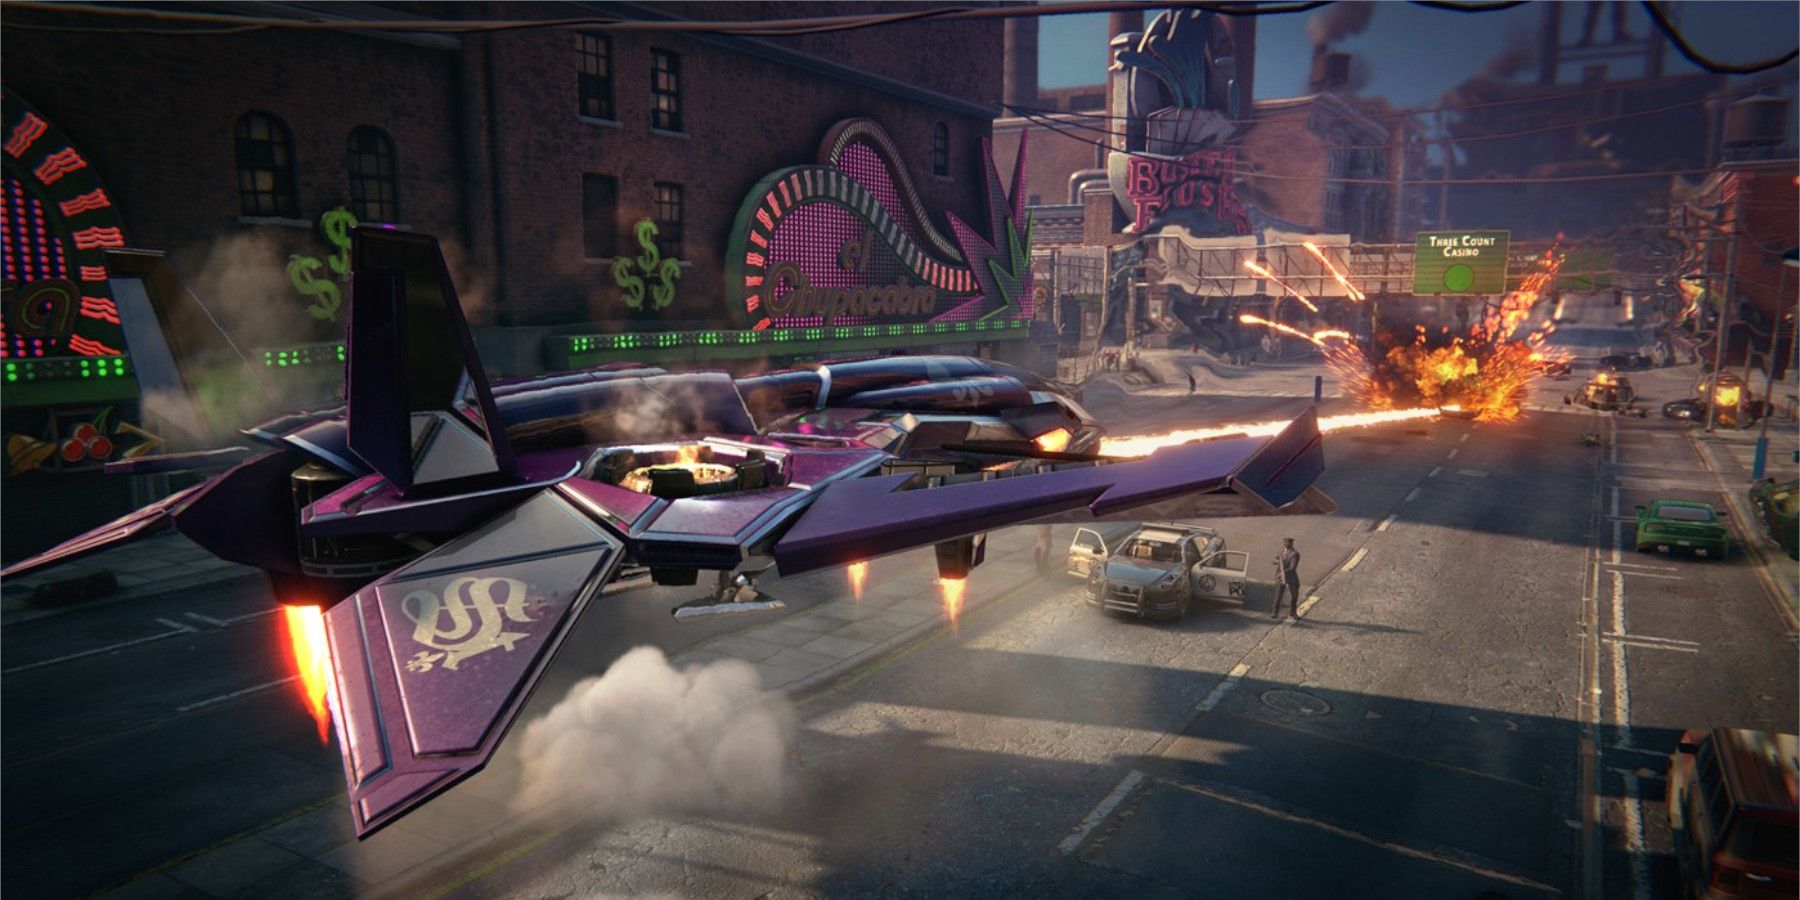 A Purple Jet shooting lasers in Saints Row: The Third